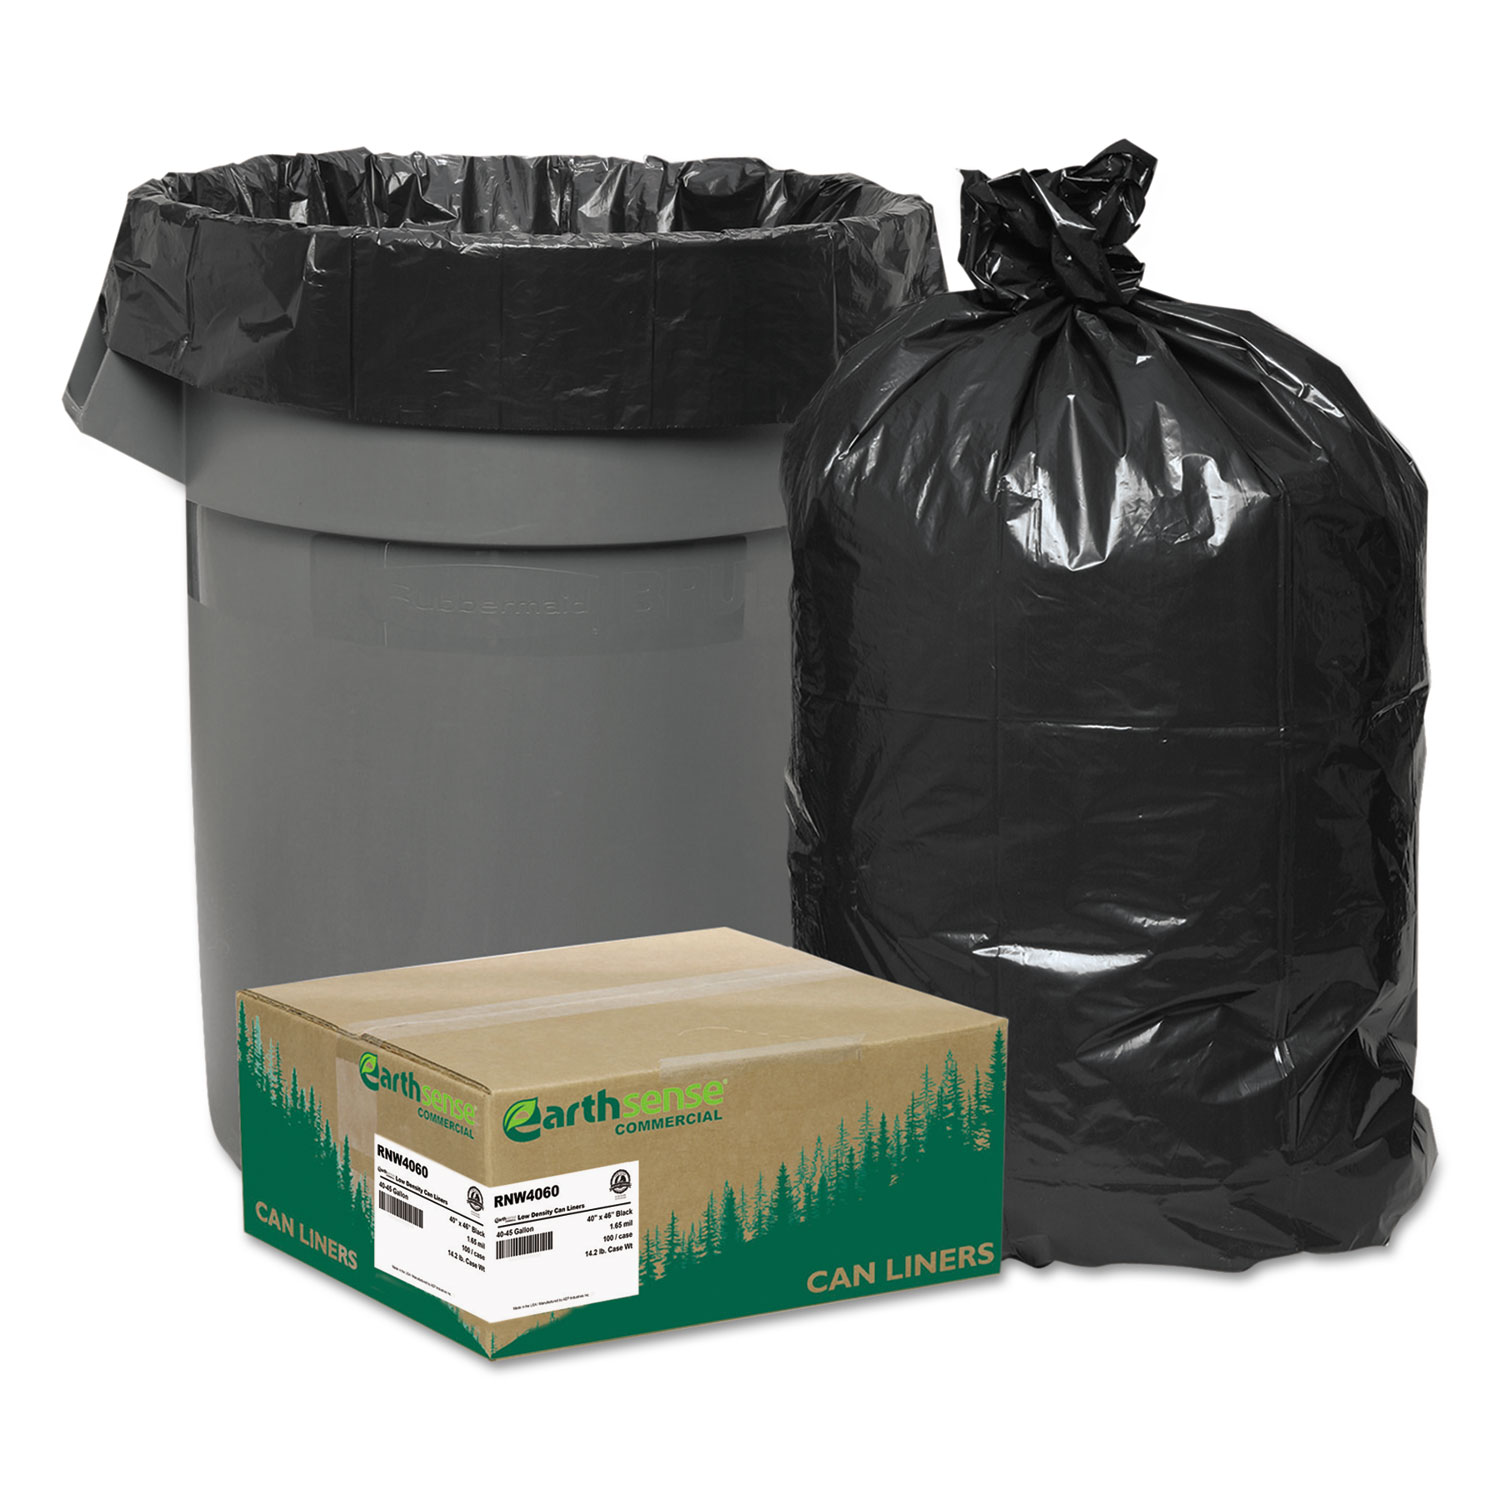  Earthsense Commercial RNW4060 Linear Low Density Recycled Can Liners, 33 gal, 1.65 mil, 33 x 39, Black, 100/Carton (WBIRNW4060) 